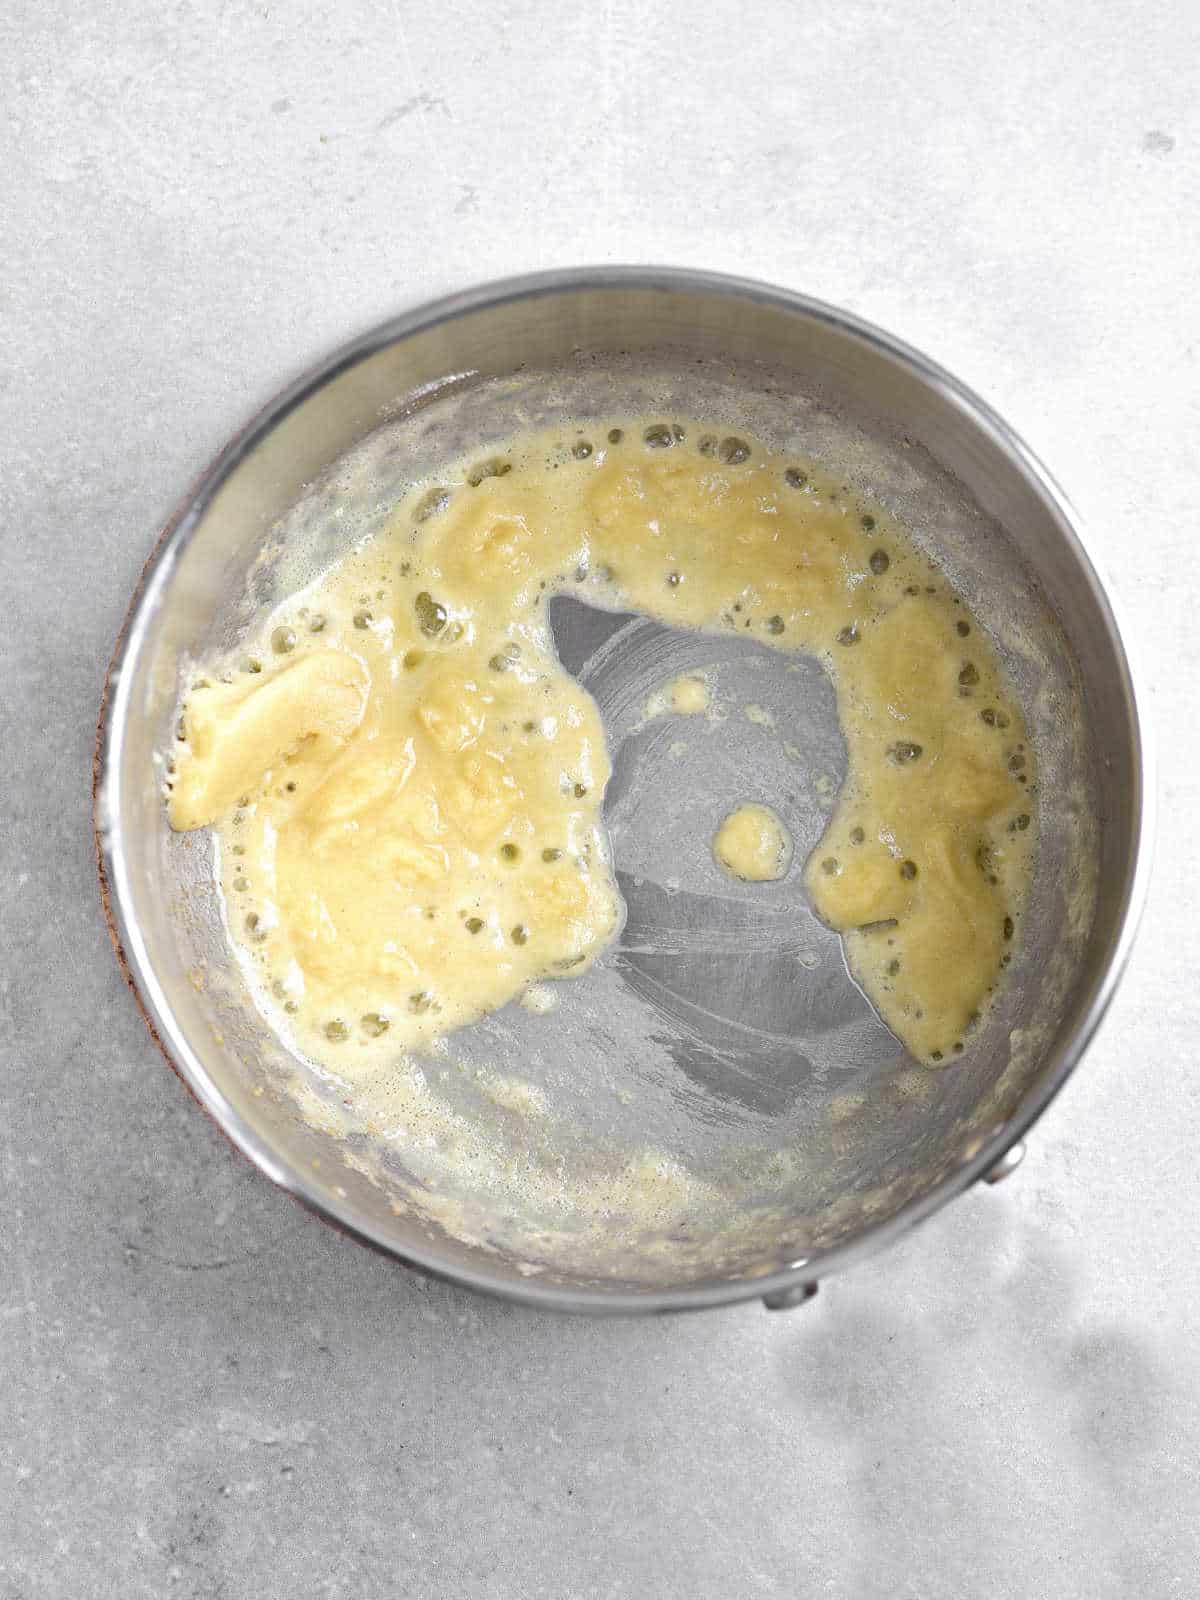 Mixture of butter and flour in a metal pan on a light grey surface.